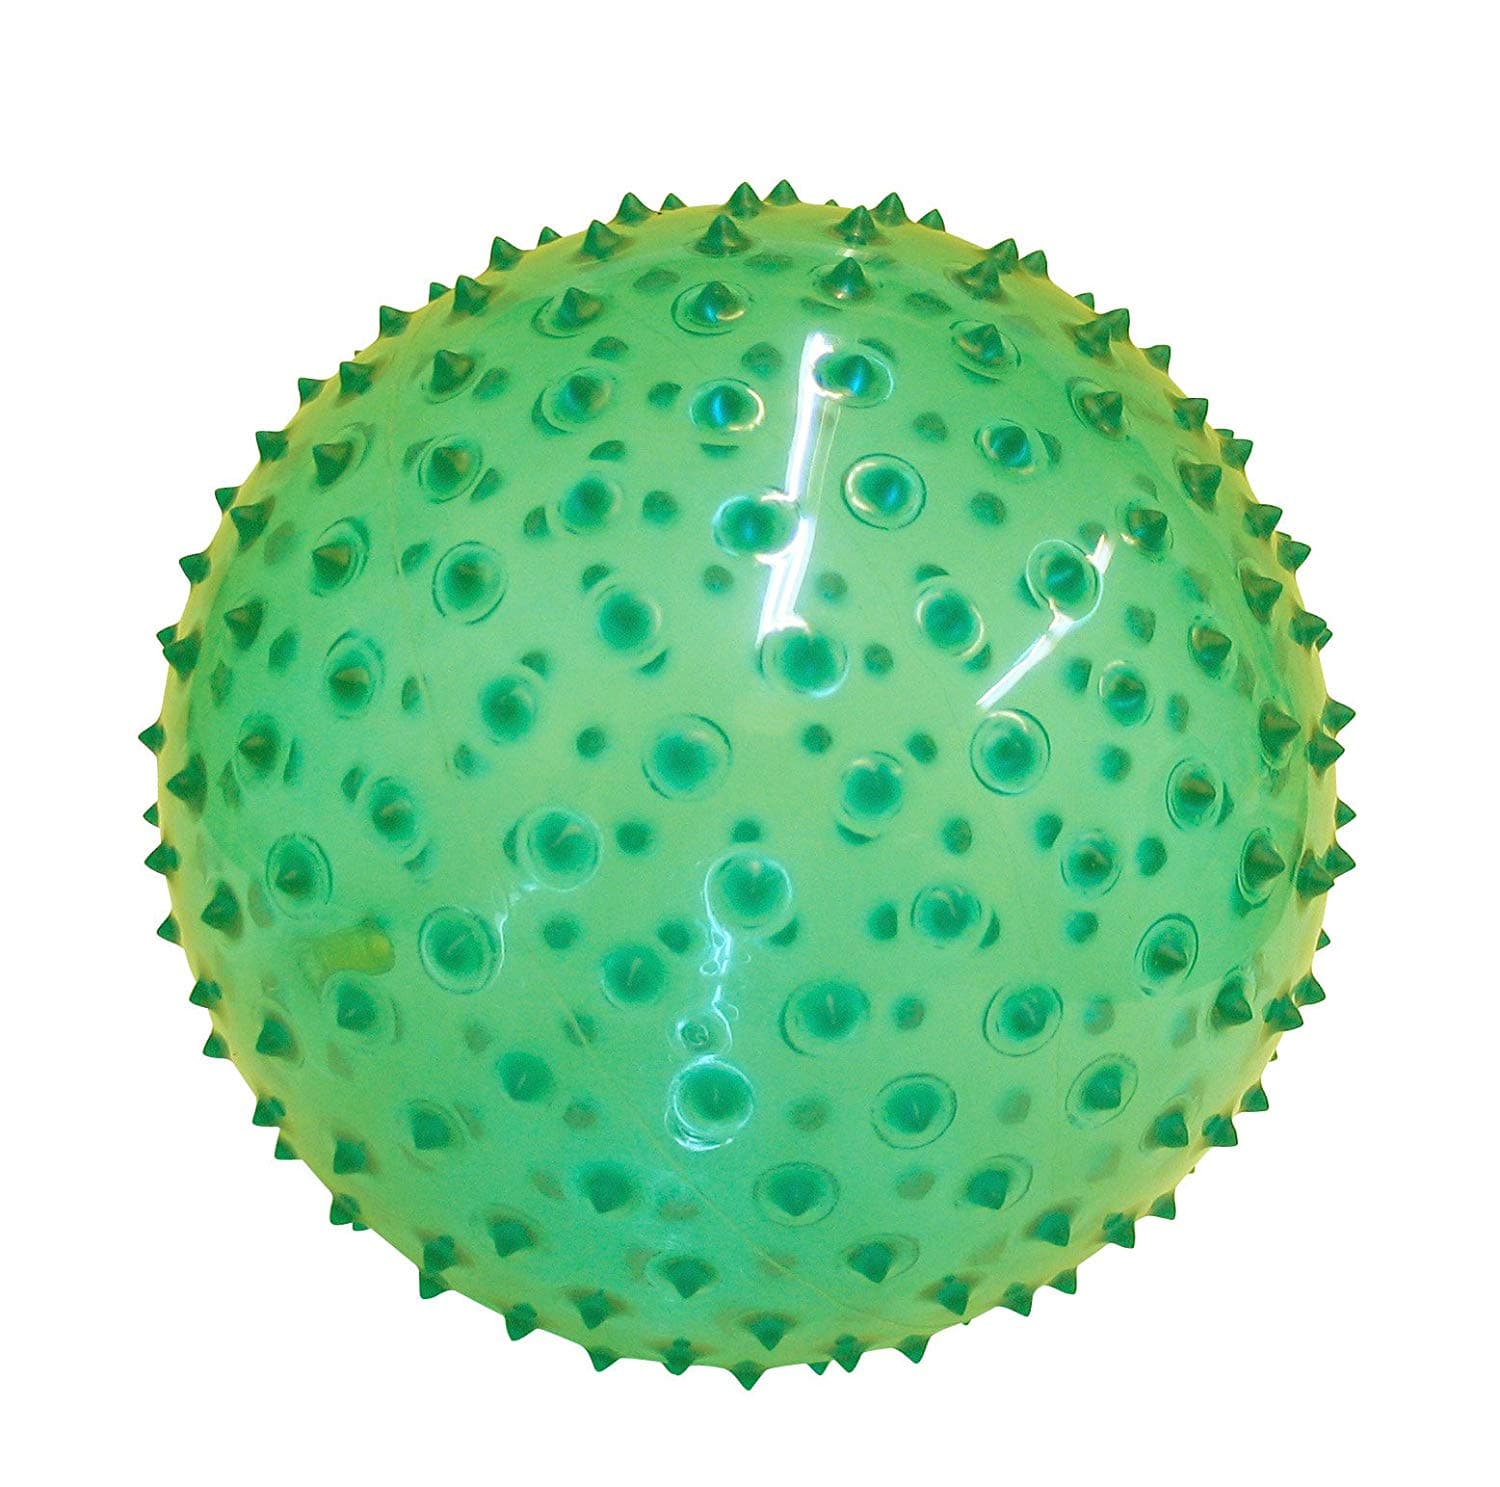 Edushape 18cm See Me Sensory Ball, The Edushape 18cm See Me Sensory Ball is very similar to Sensory Dot Ball apart from they have attractive translucent colours. The Edushape 18cm See Me Sensory Balls are great for you and/or your little one to play with and makes a perfect squidgy toy. The soft nubs on the Edushape 18cm See Me Sensory Ball are designed to give tactile stimulation when held or thrown by the user. The different colours are lovely and easy on the eyes and will visually stimulate you whilst de